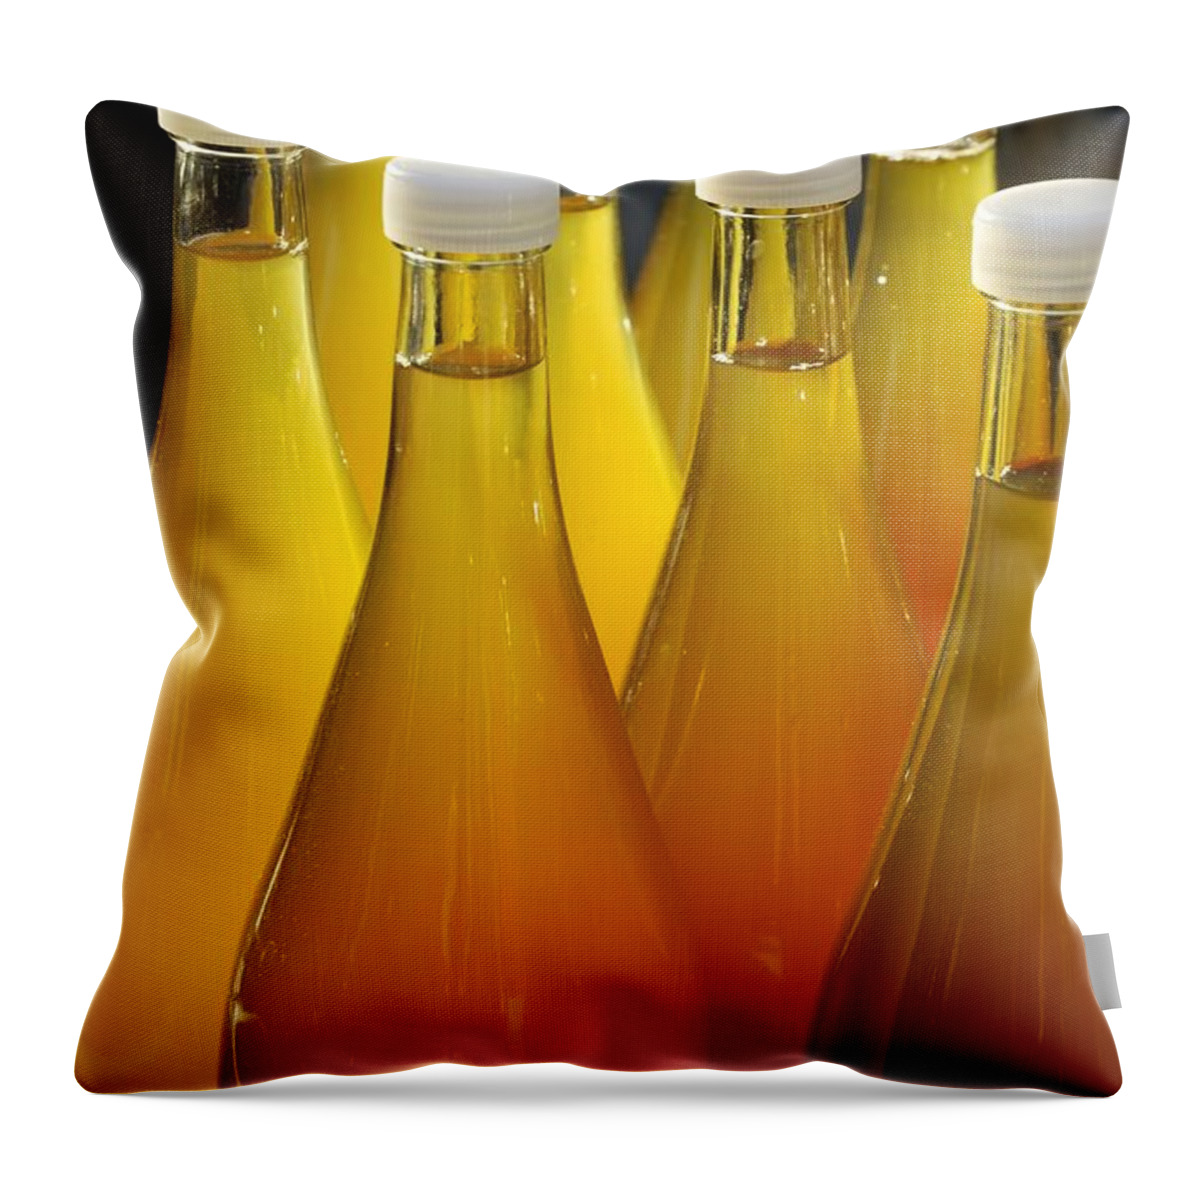 Bottles Throw Pillow featuring the photograph Apple juice in bottles by Matthias Hauser